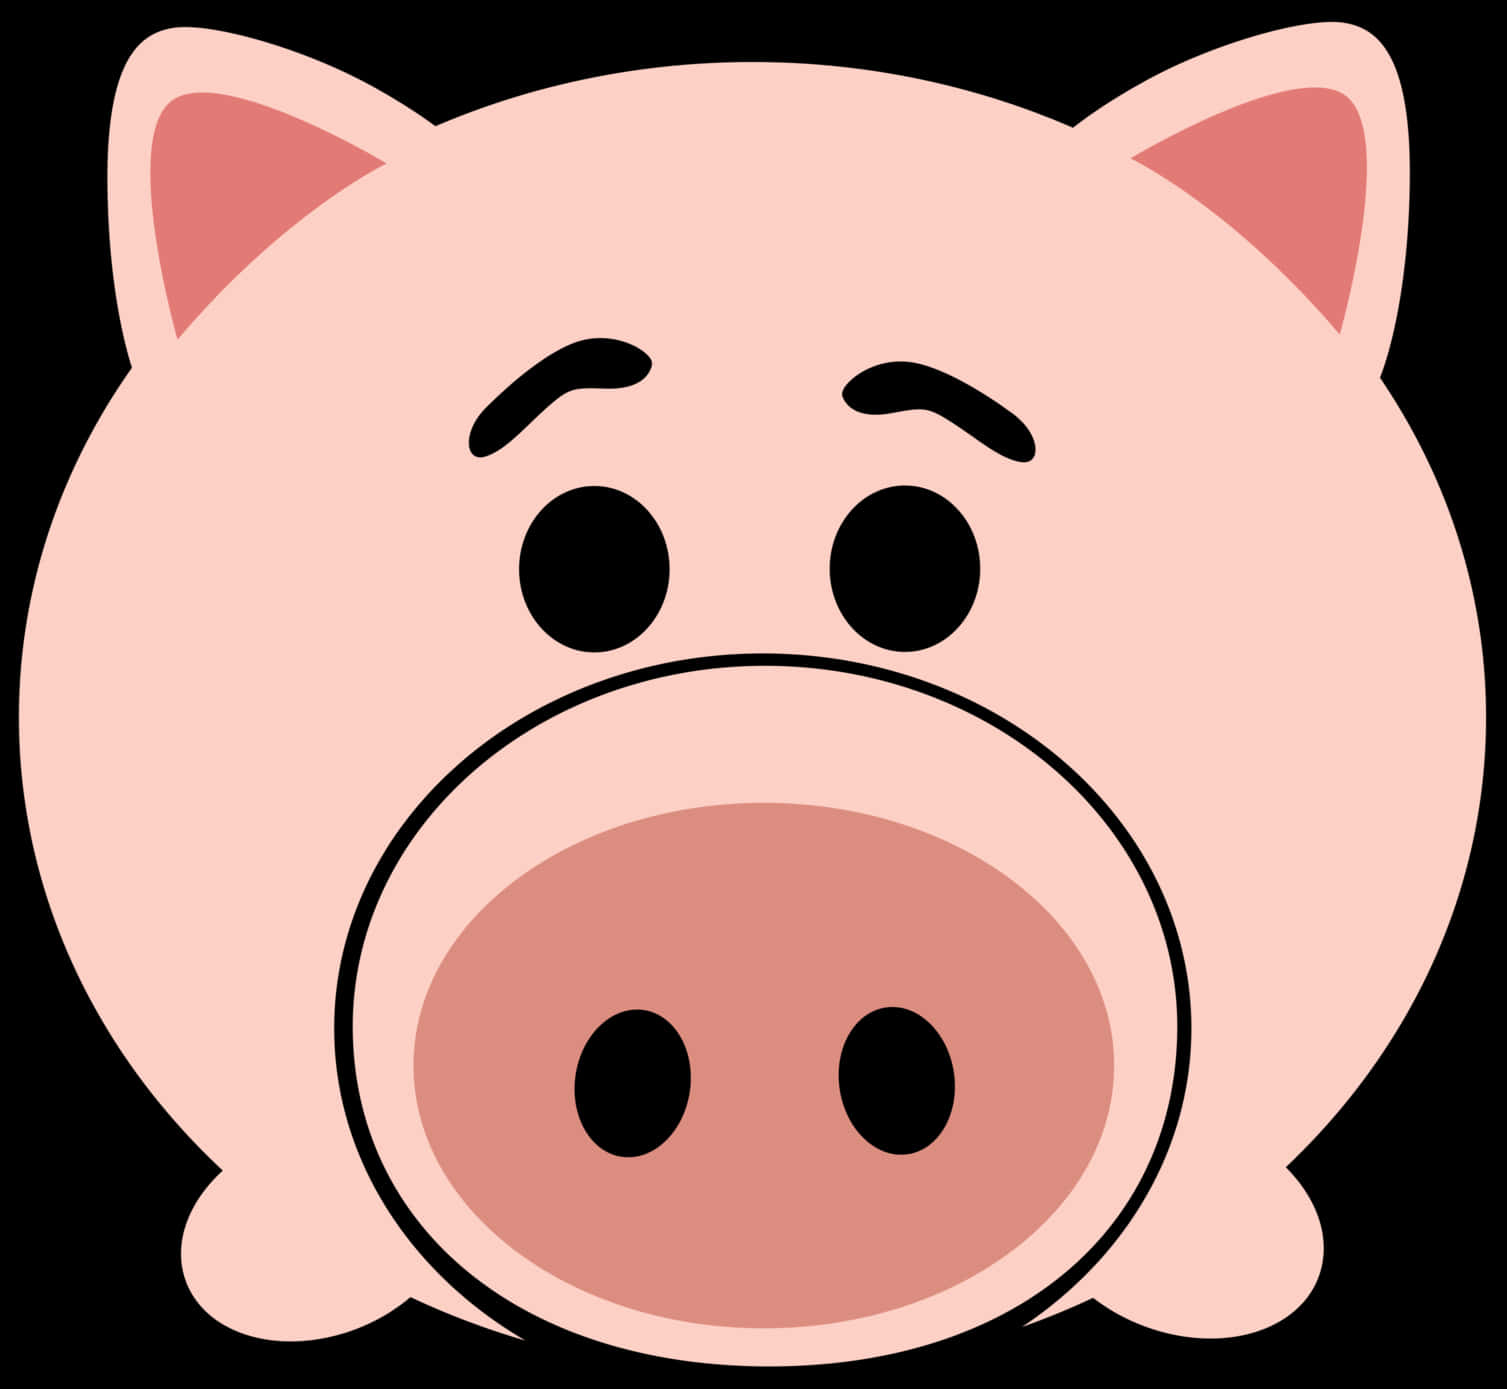 A Cartoon Pig With Black Eyes PNG